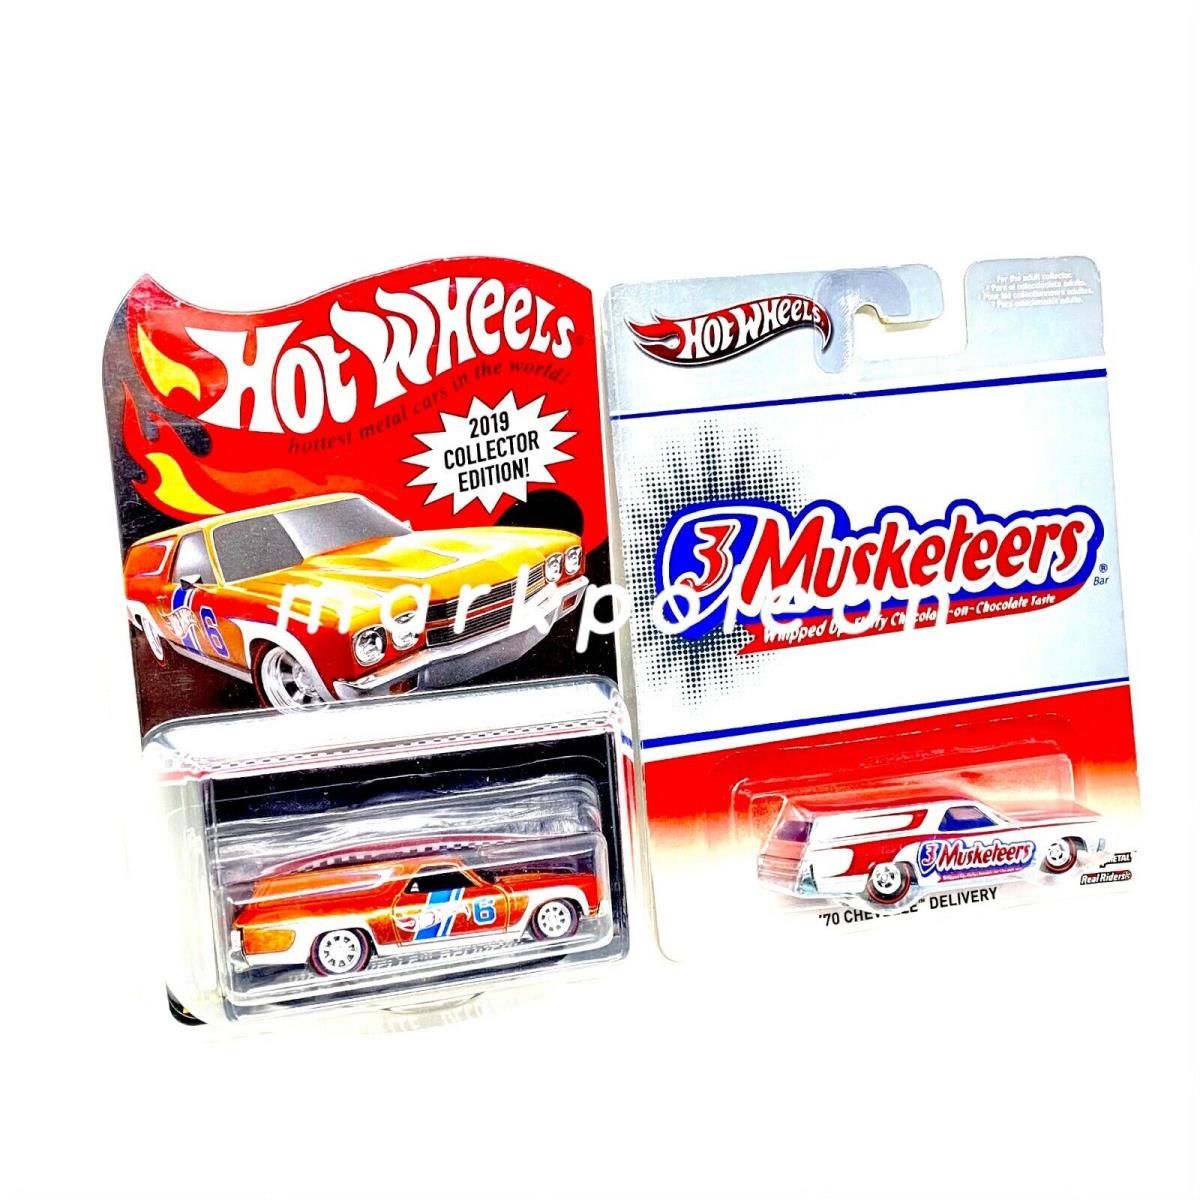 Hot Wheels Premium 70 Chevelle Delivery Set of 2 Gamestop 3Musketeer Real Riders